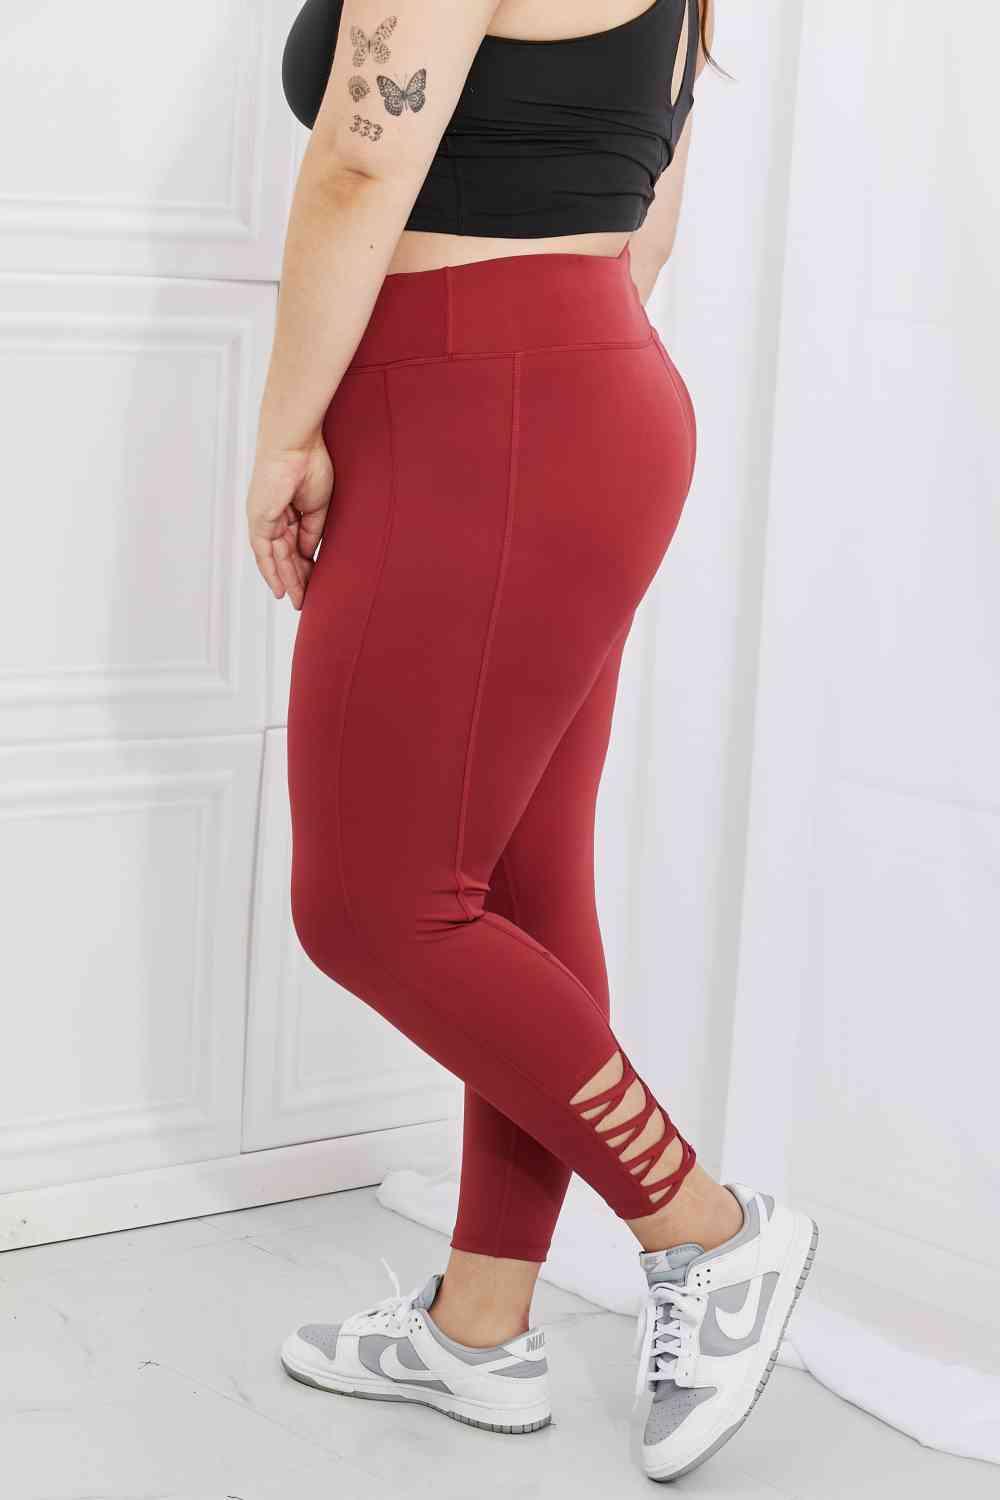 Yelete Ready For Action Full Size Ankle Cutout Active Leggings in Brick Red - AMIClubwear